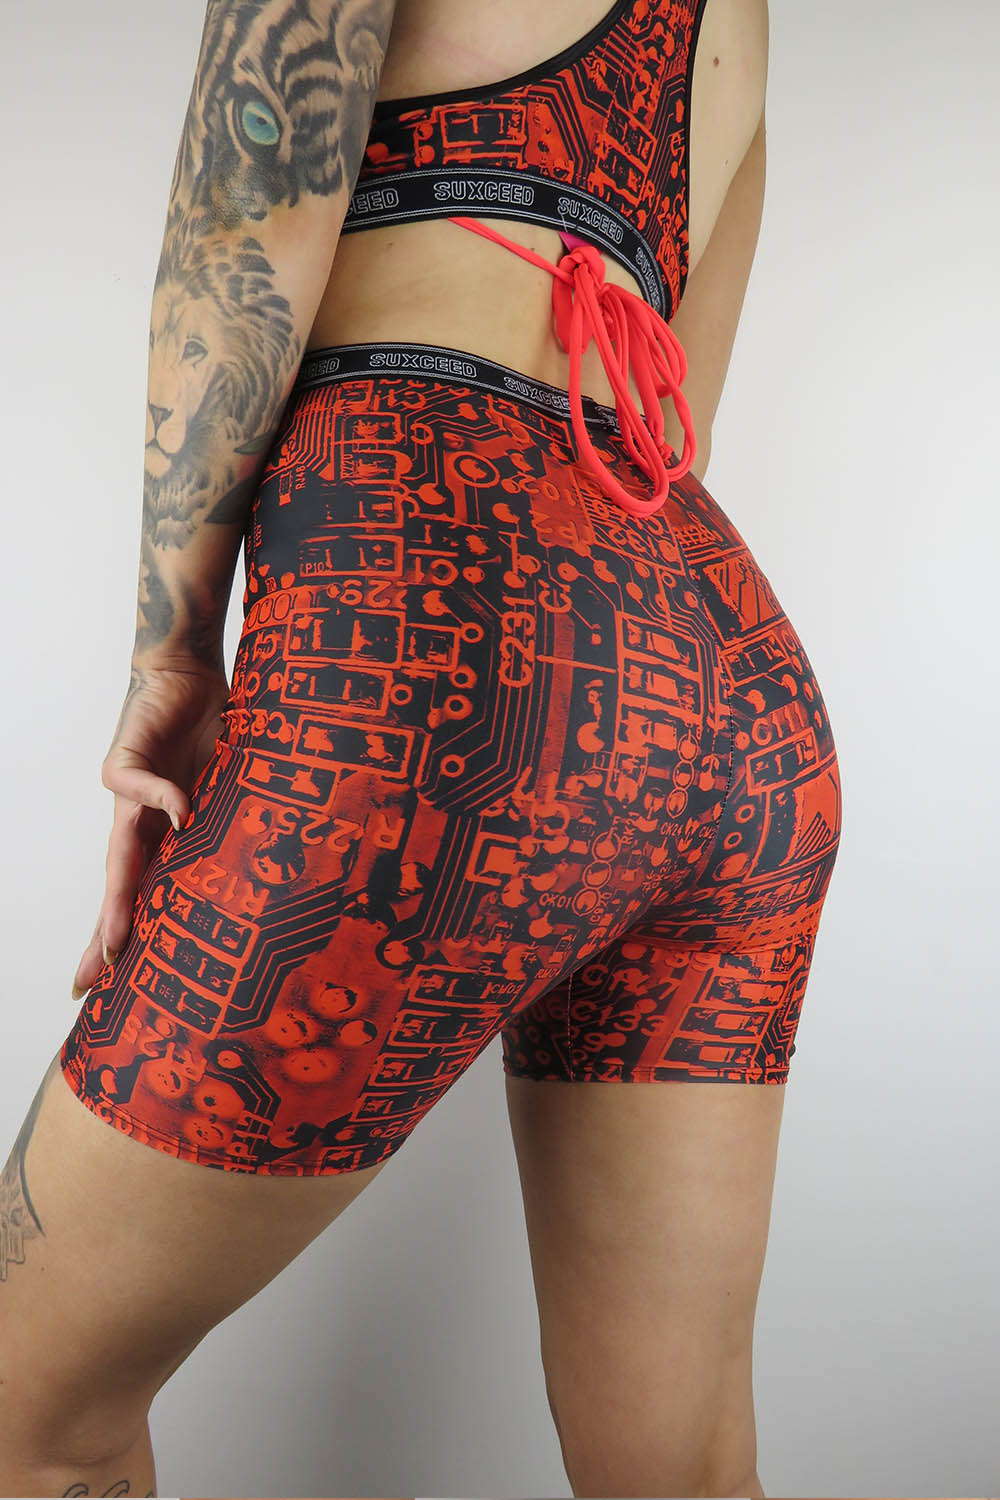 Tekno Cycle Shorts (Size 8) - Suxceedwomens